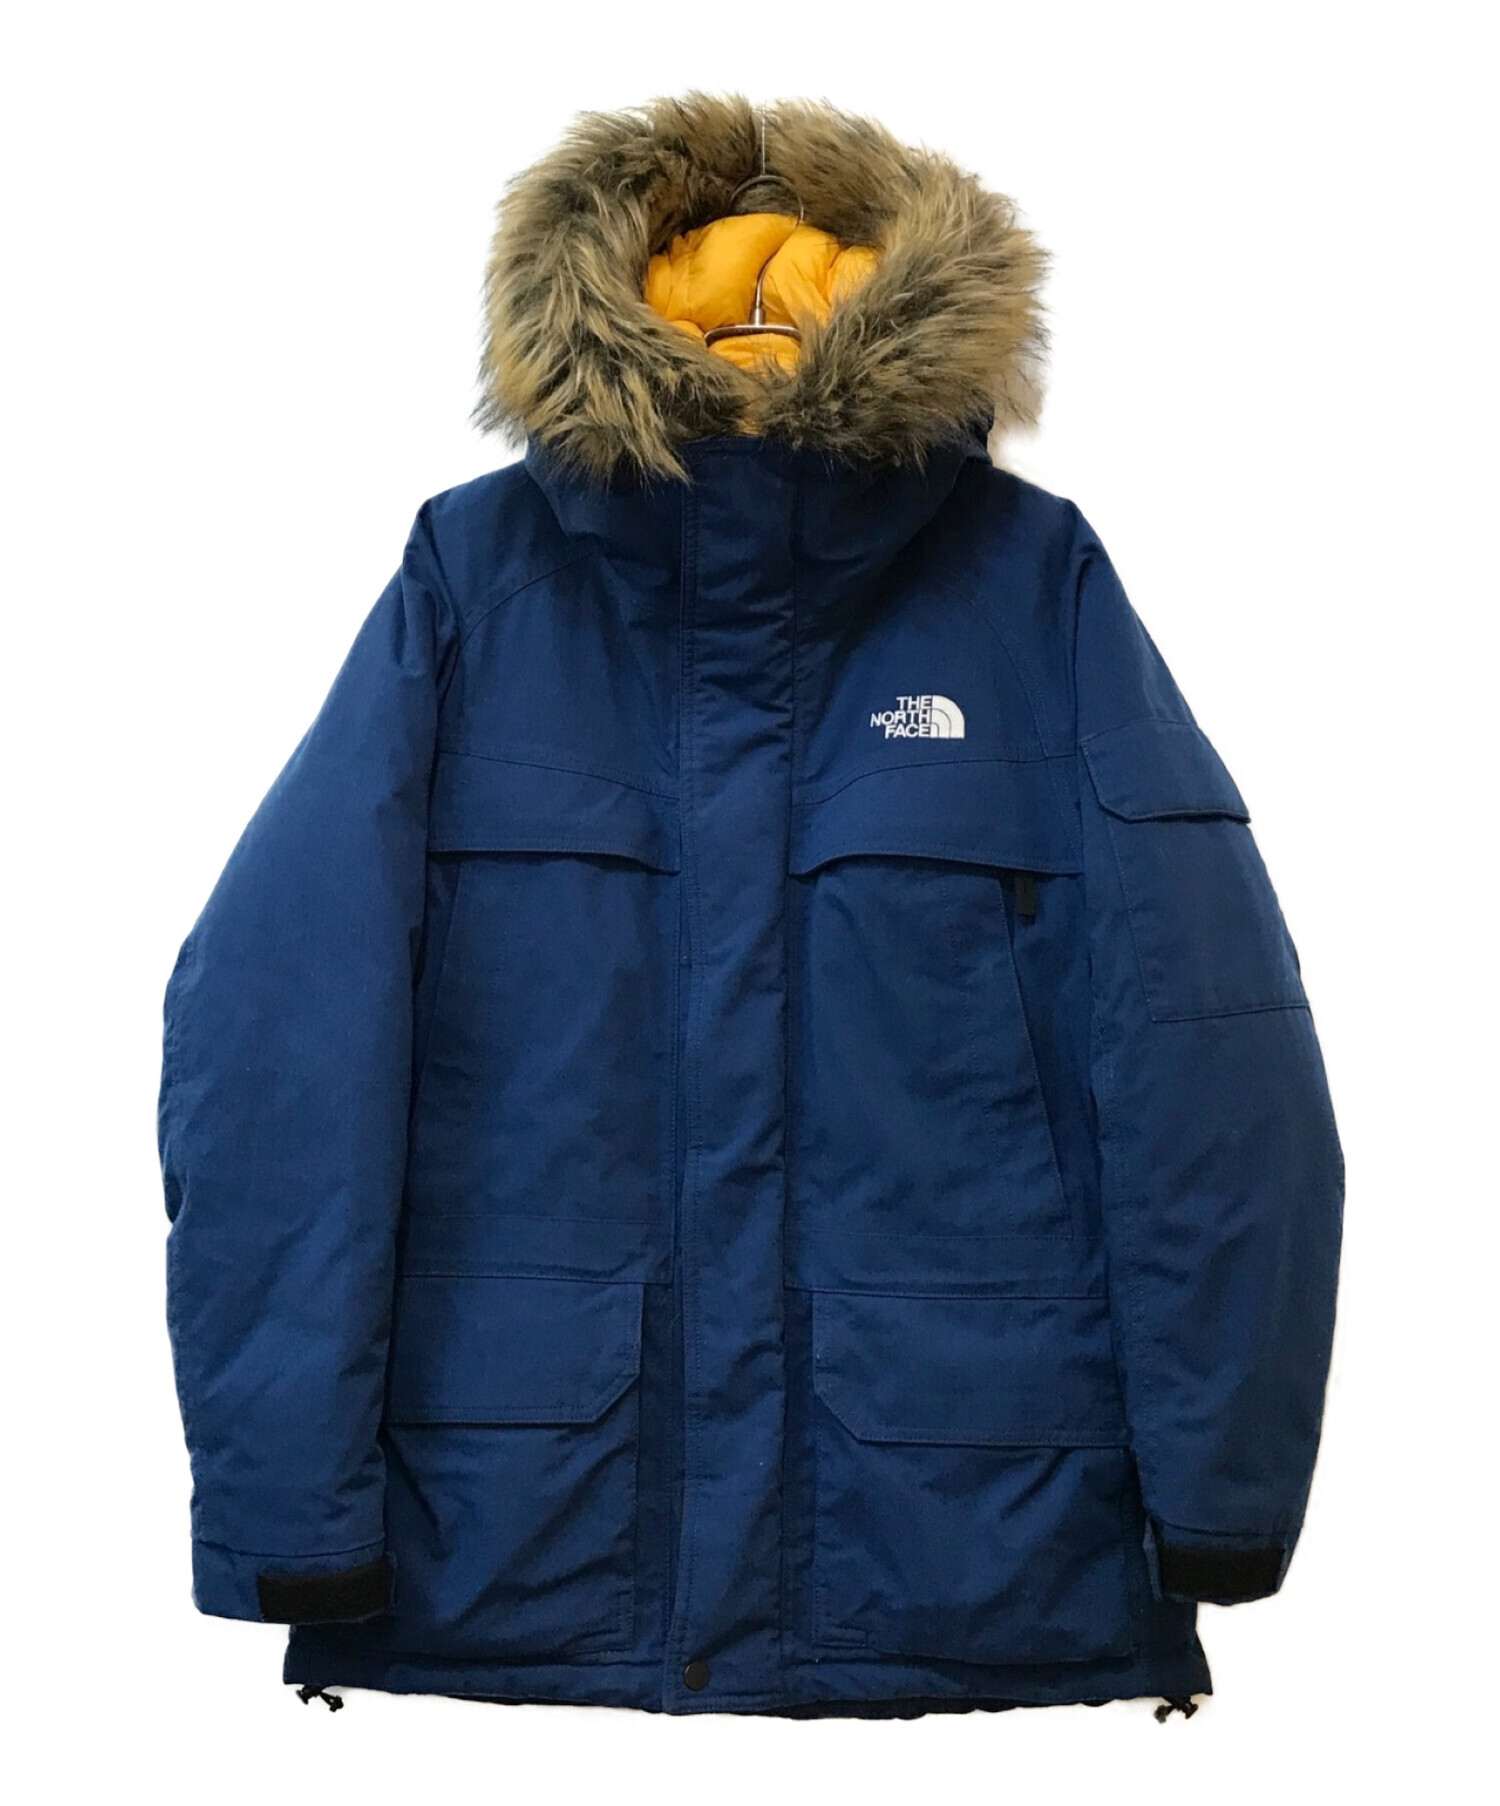 THE NORTH FACE マクマードパーカー - beaconparenting.ie